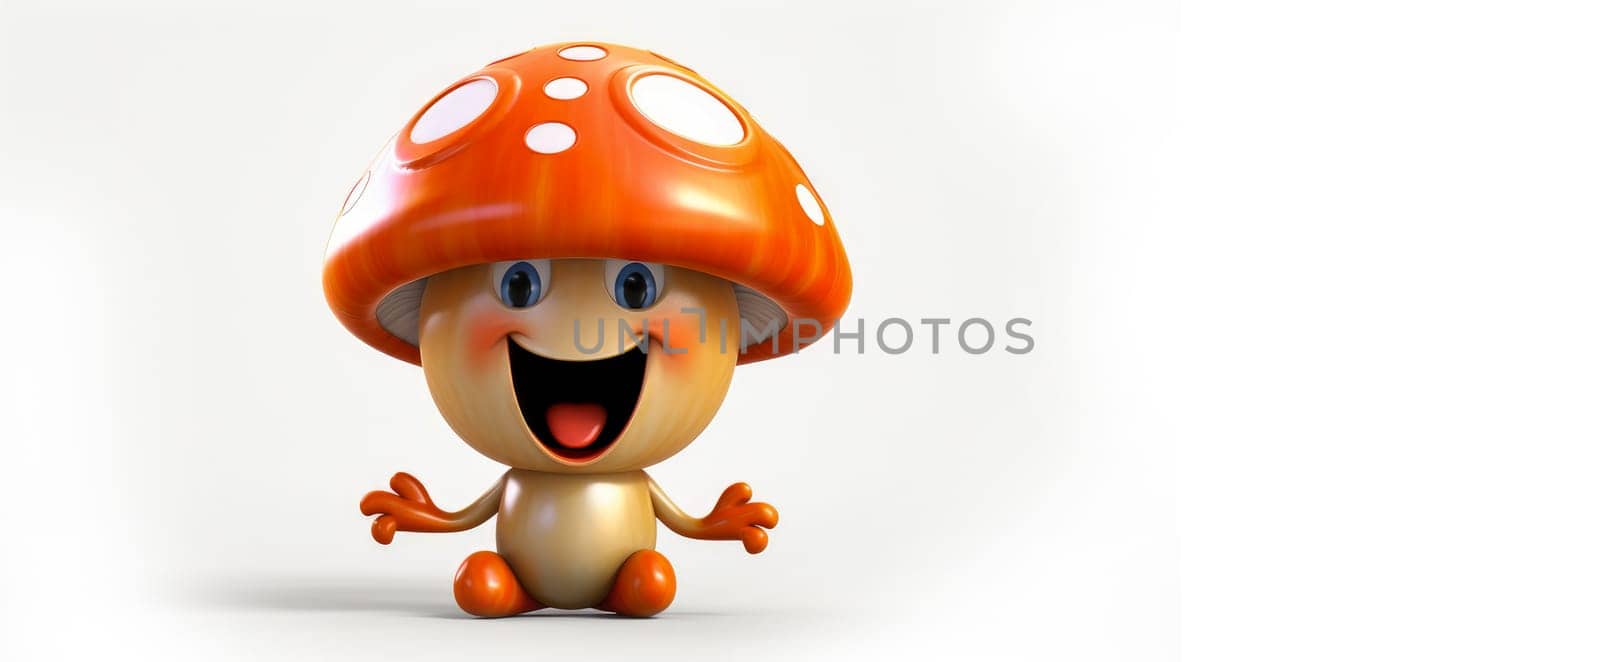 Champignon with a cheerful face 3D on a white background. Cartoon characters, three-dimensional character, healthy lifestyle, proper nutrition, diet, fresh vegetables and fruits, vegetarianism, veganism, food, breakfast, fun, laughter, banner